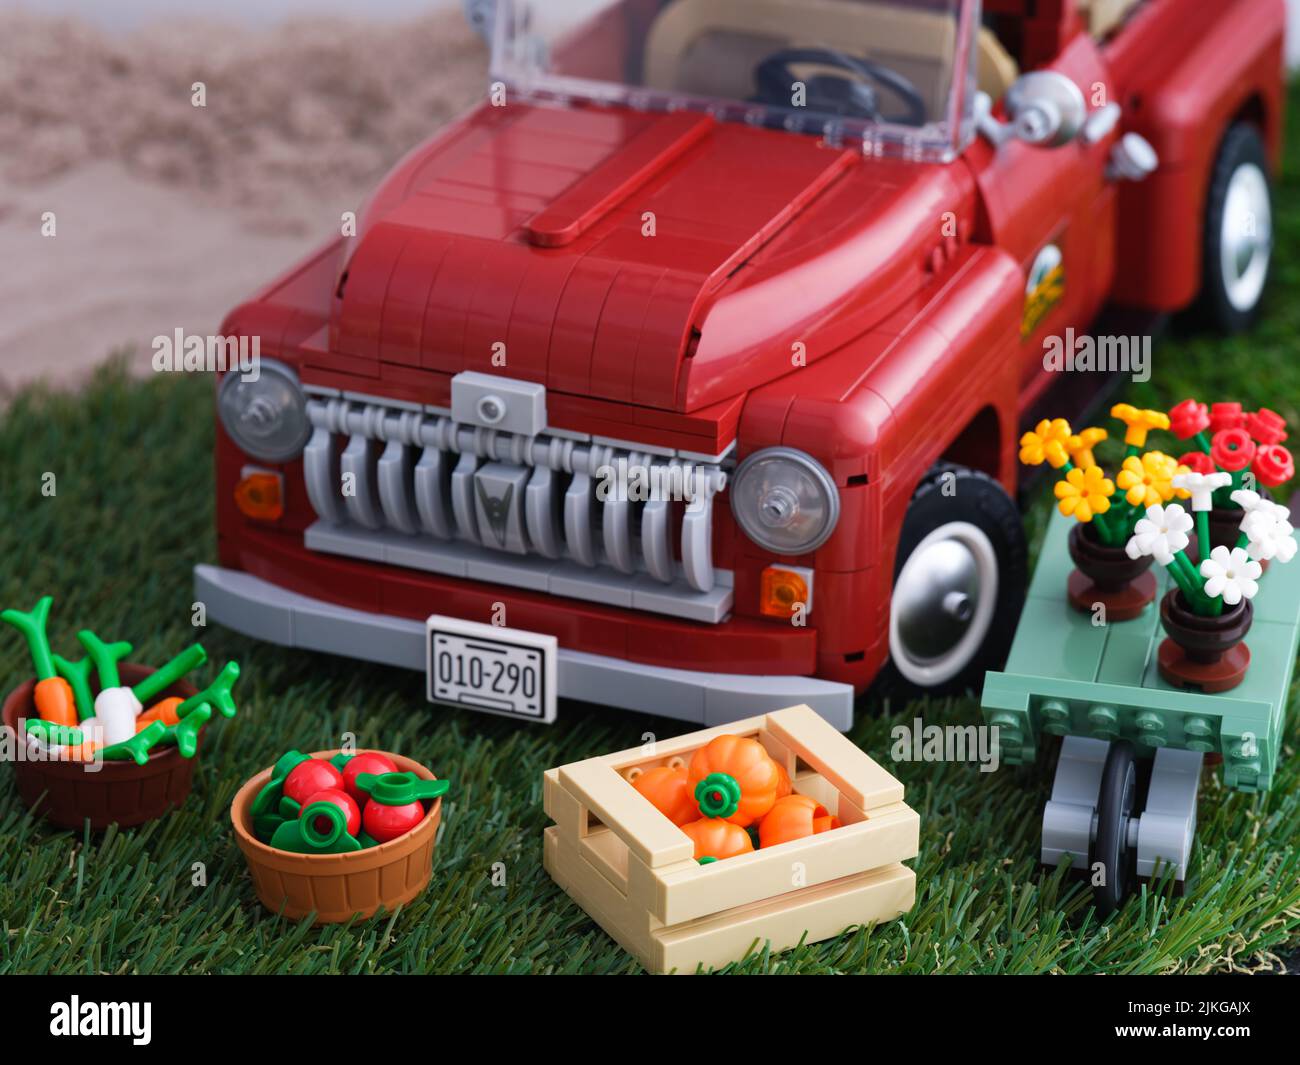 Tambov, Russian Federation - January 02, 2022 A Lego Pickup Truck and some crates of vegetables and a wheelbarrow with flowers near it on grass. Stock Photo